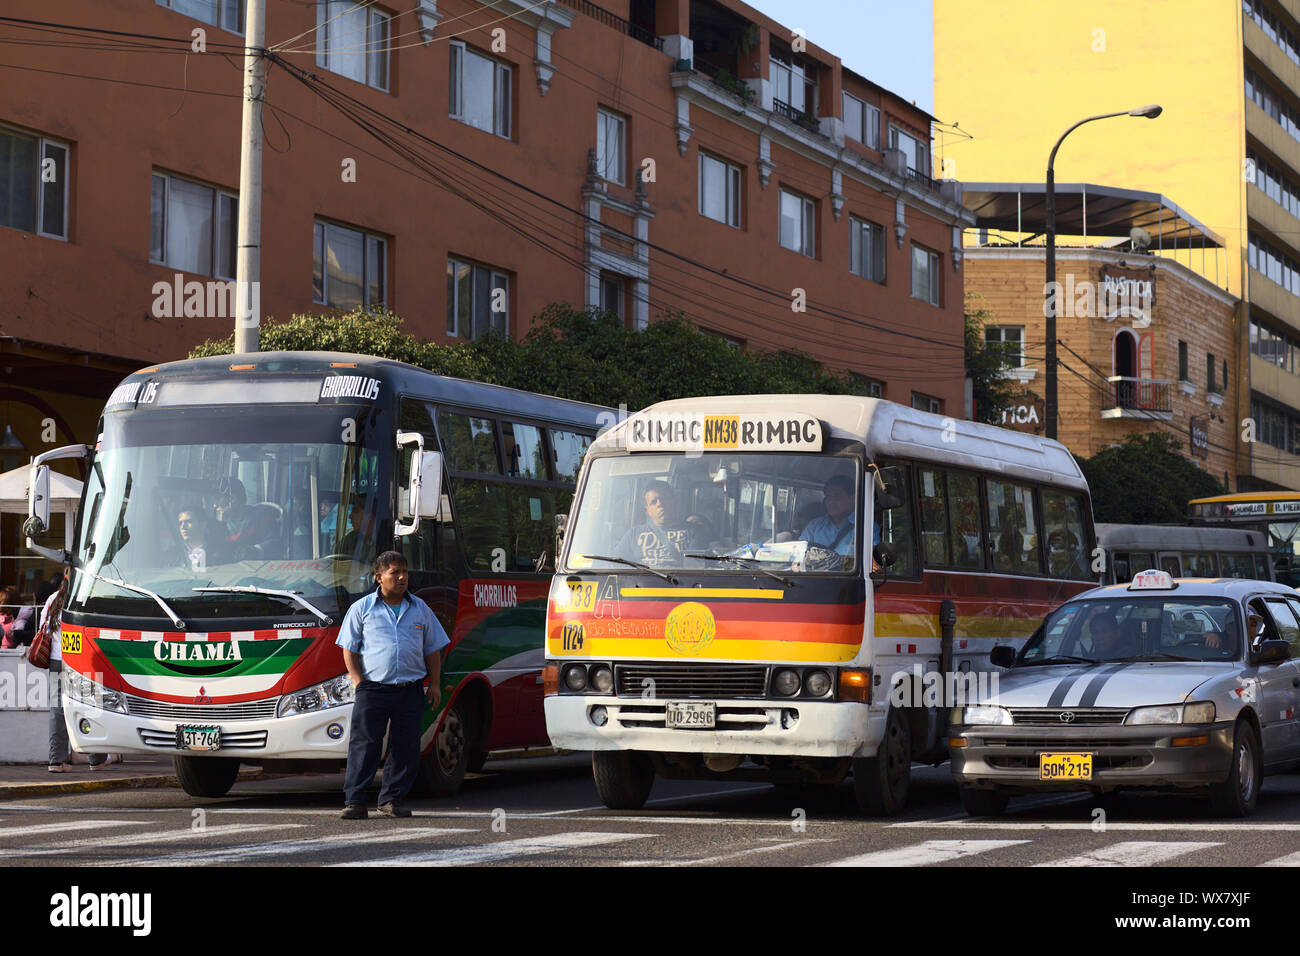 LIMA, PERU - SEPTEMBER 13, 2011: Buses and a taxi standing at red light with a bus conductor standing on Avenida Diagonal calling out for passengers Stock Photo